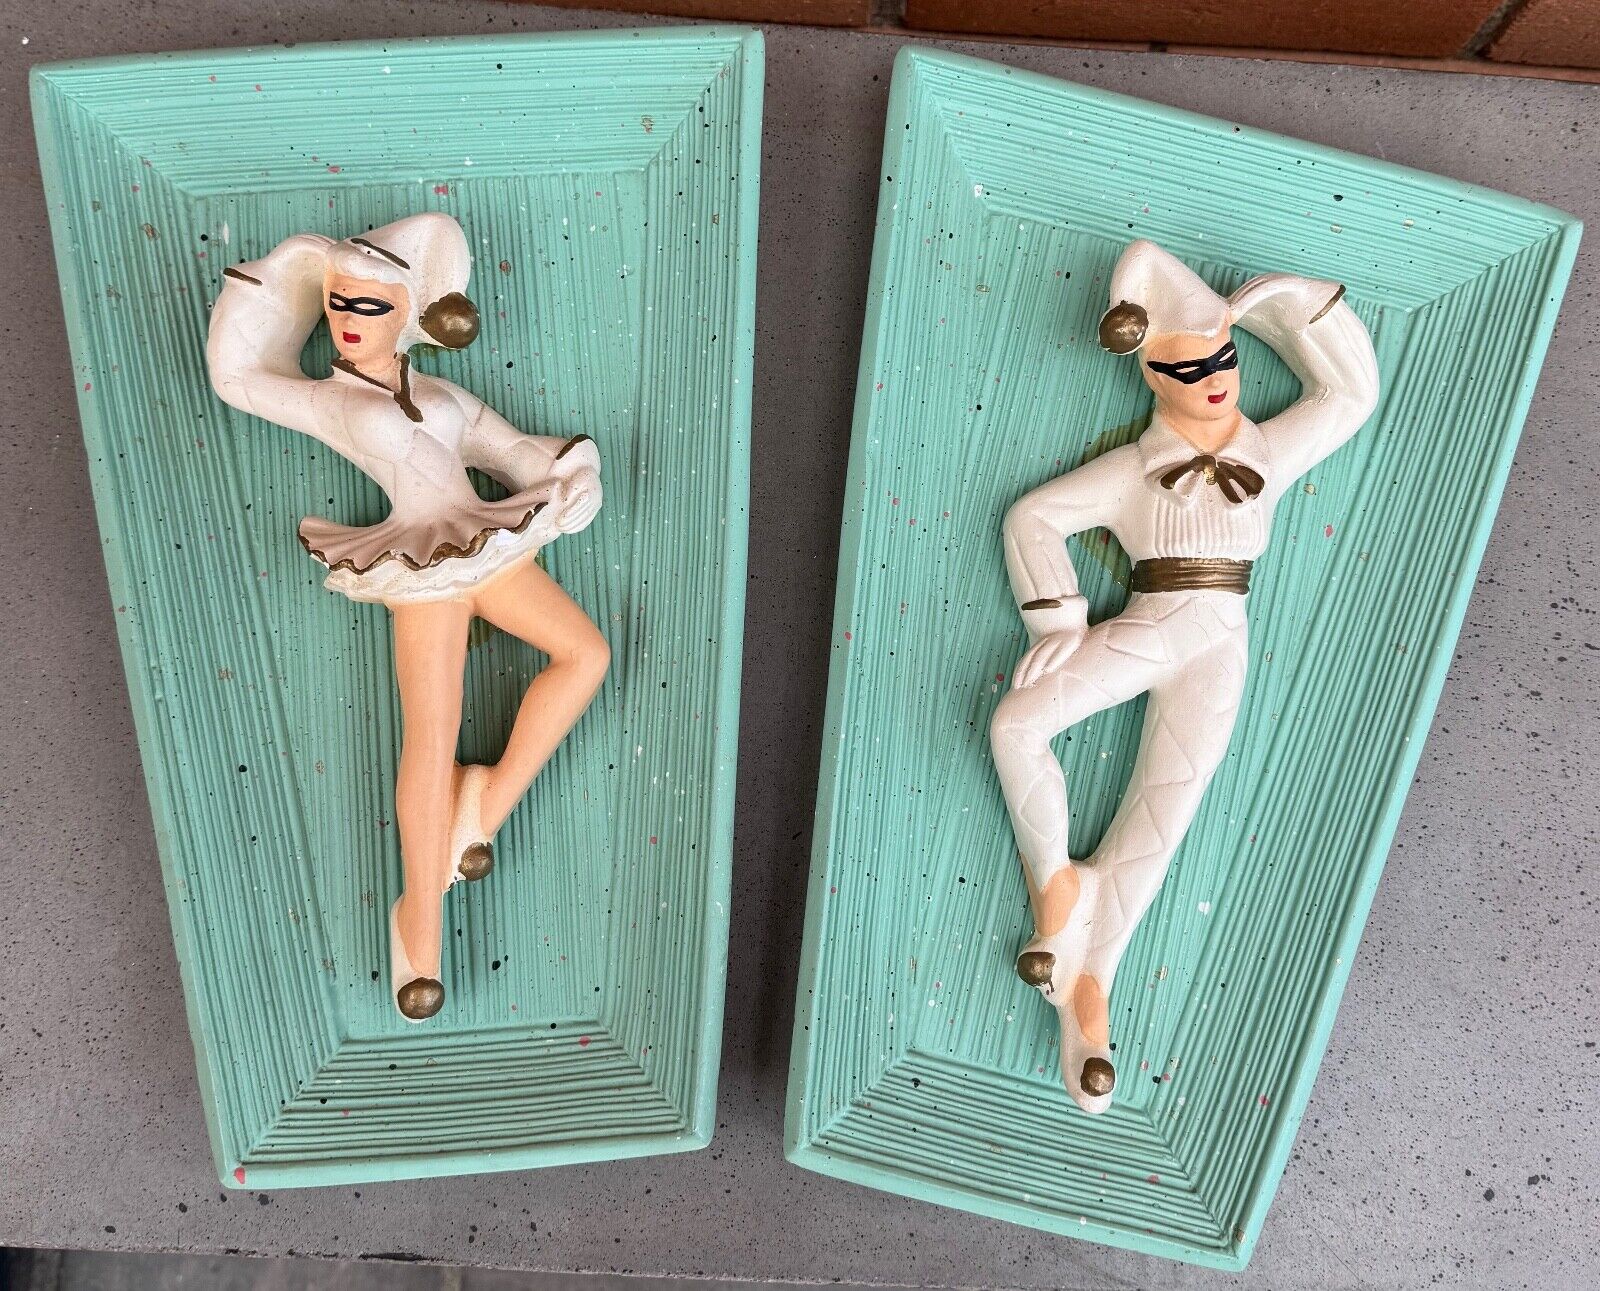 Vintage 1950s Harlequin Chalkware Plaques Wall Hangings Mid Century MCM Kitsch